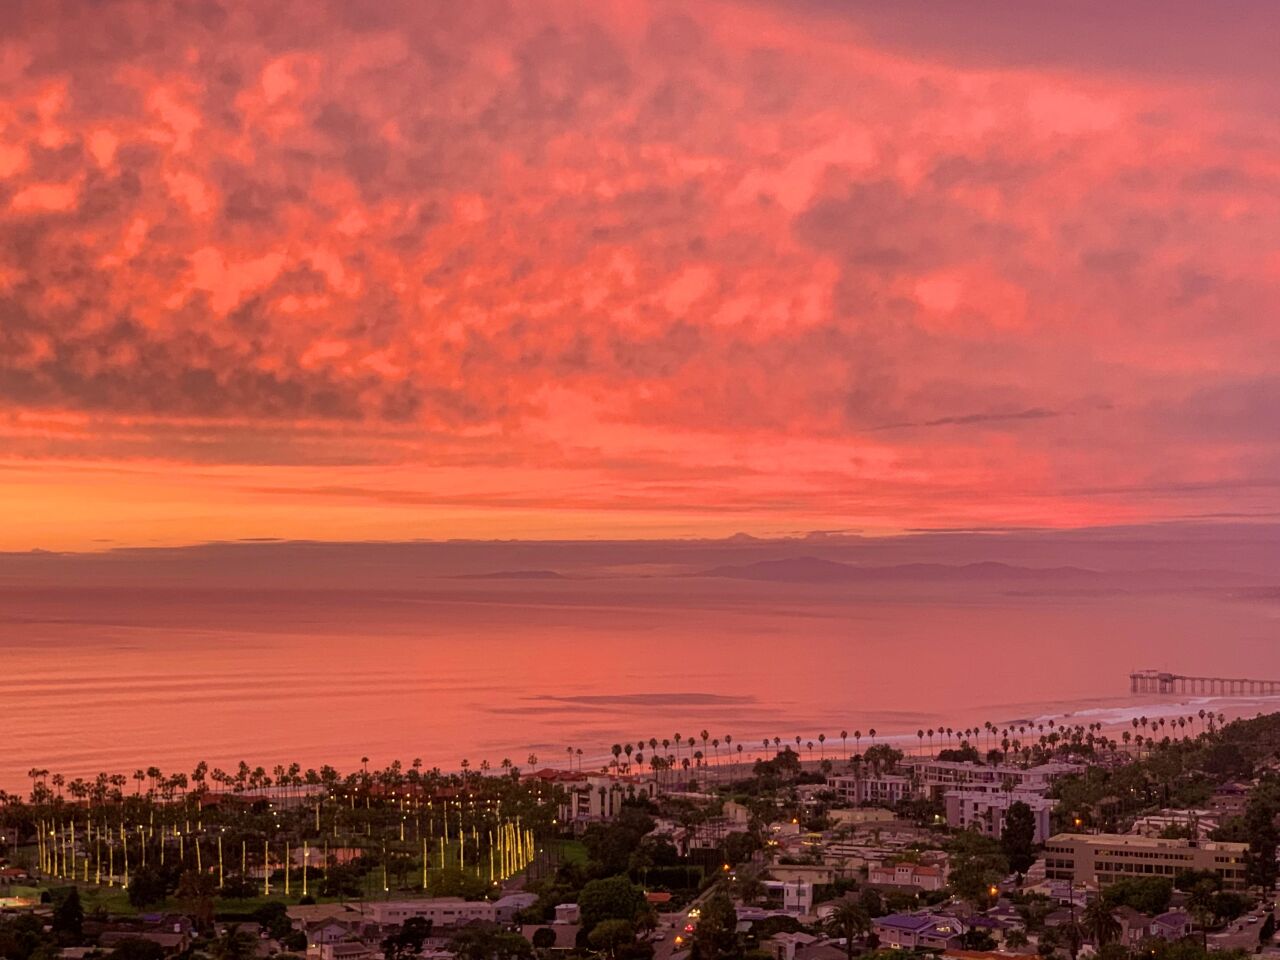 During this stunning sunset over La Jolla Shores, "the grove of palm trees at La Jolla Beach & Tennis Club looked like birthday candles from above," Kathryn Anthony says.